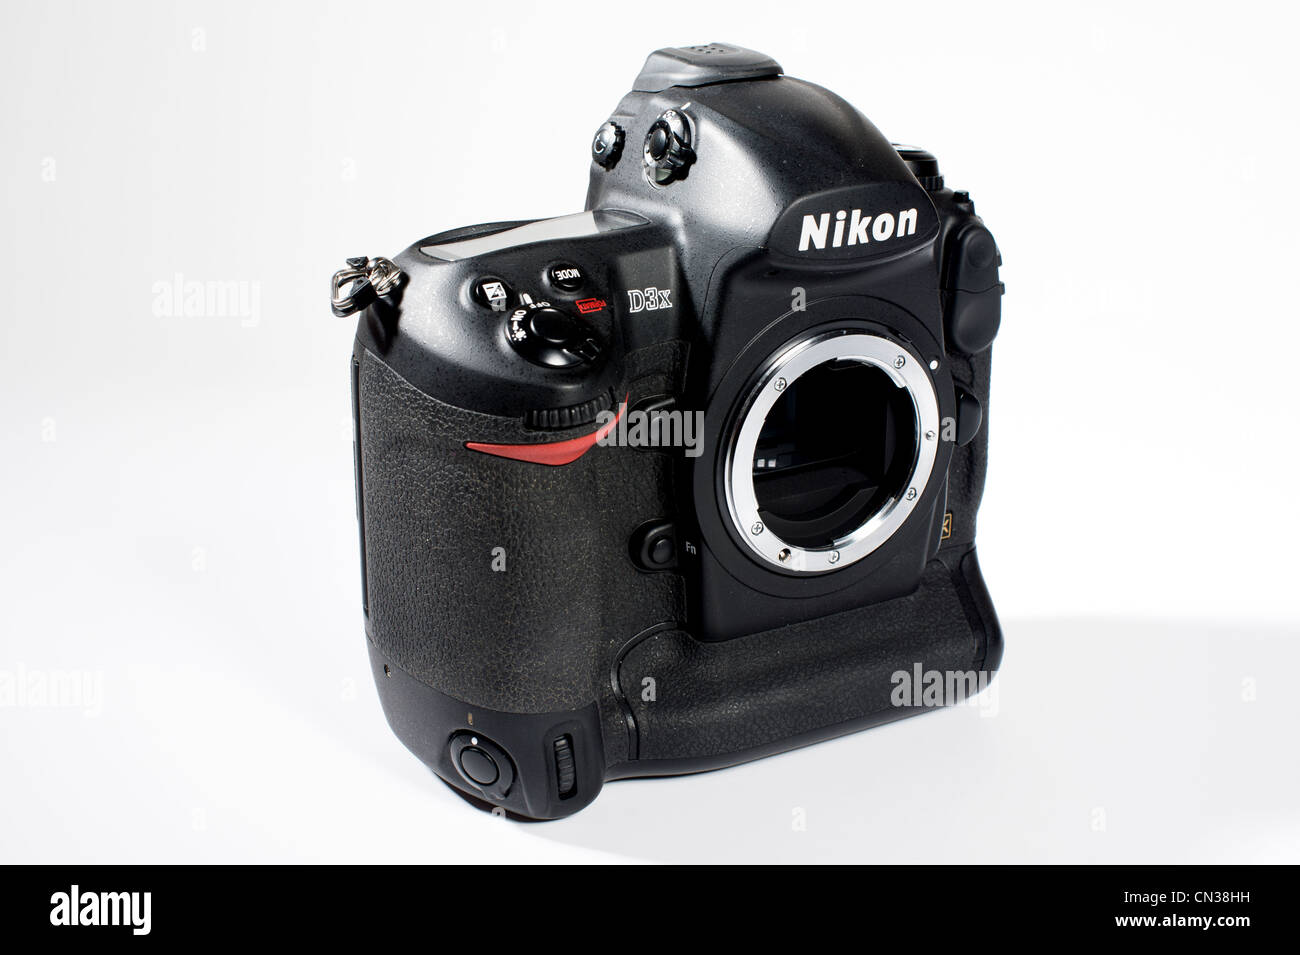 The Nikon D3x, Nikon's high resolution, 24mp professional DSLR photographed on white background without lens attached. Stock Photo